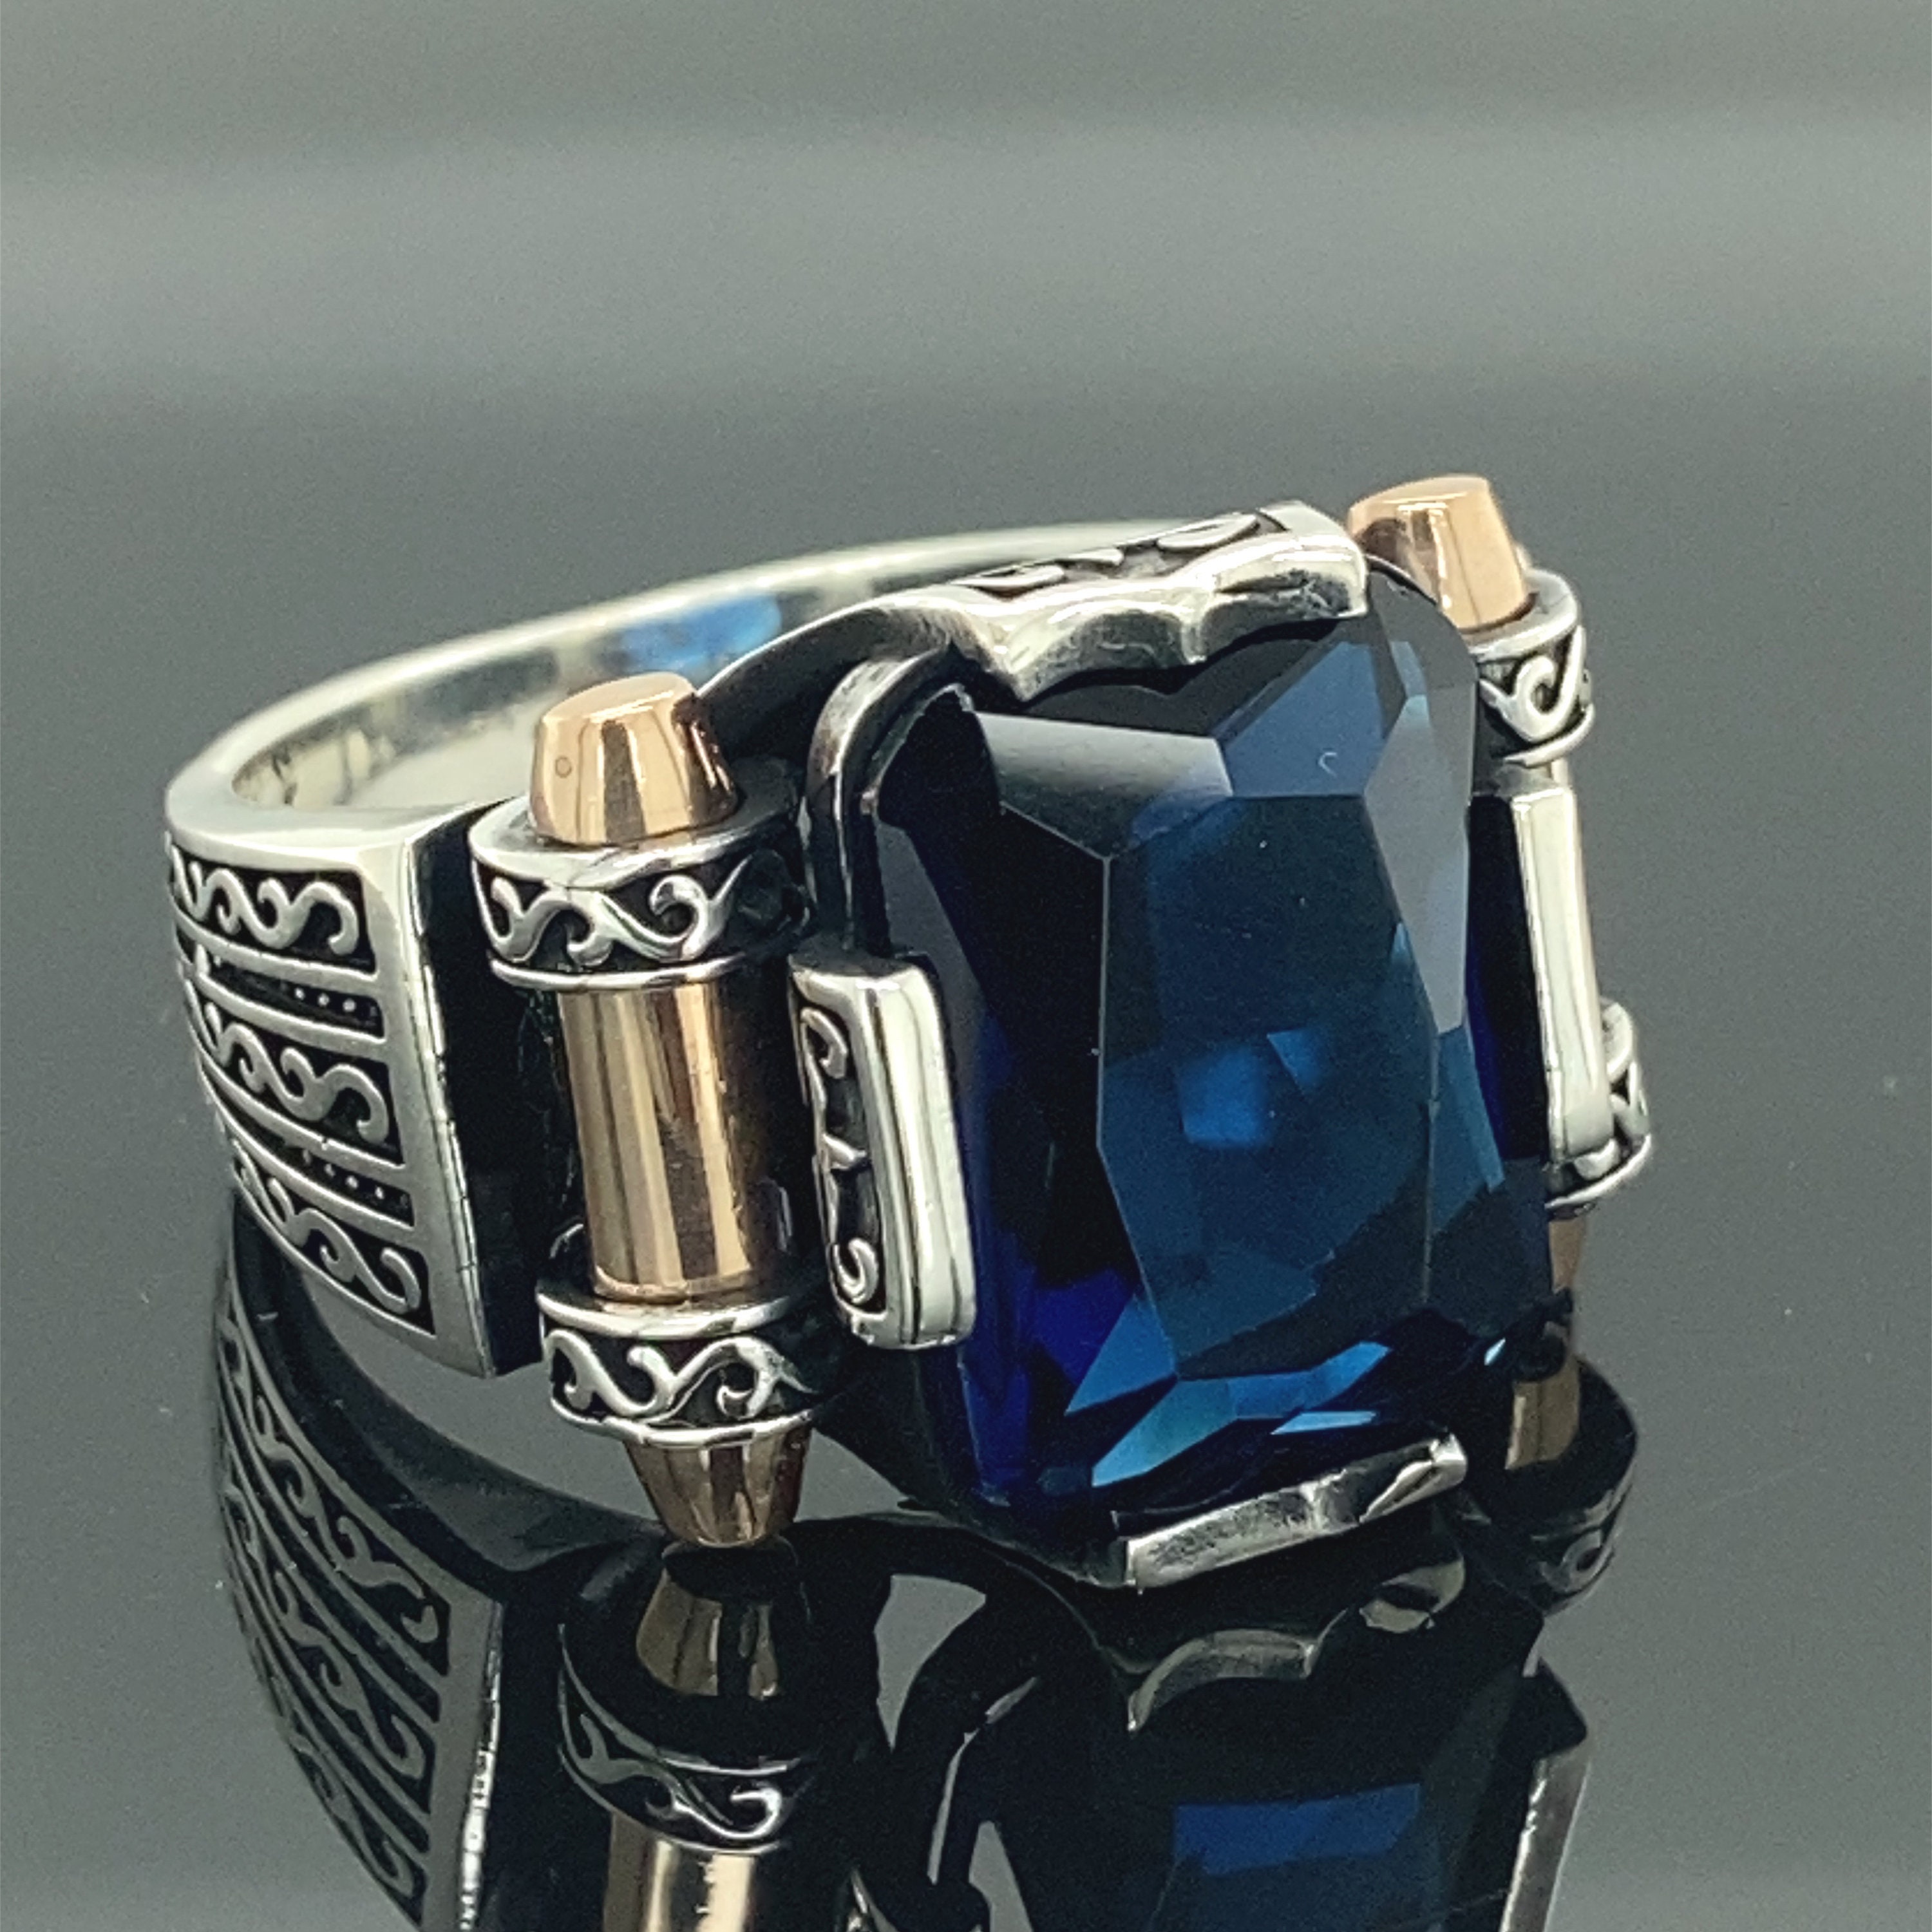 Blue Dazzling Diamond Bluestone Couple Rings Luxury Designer Jewelry For Men  And Women From Goodluck92081, $1.13 | DHgate.Com